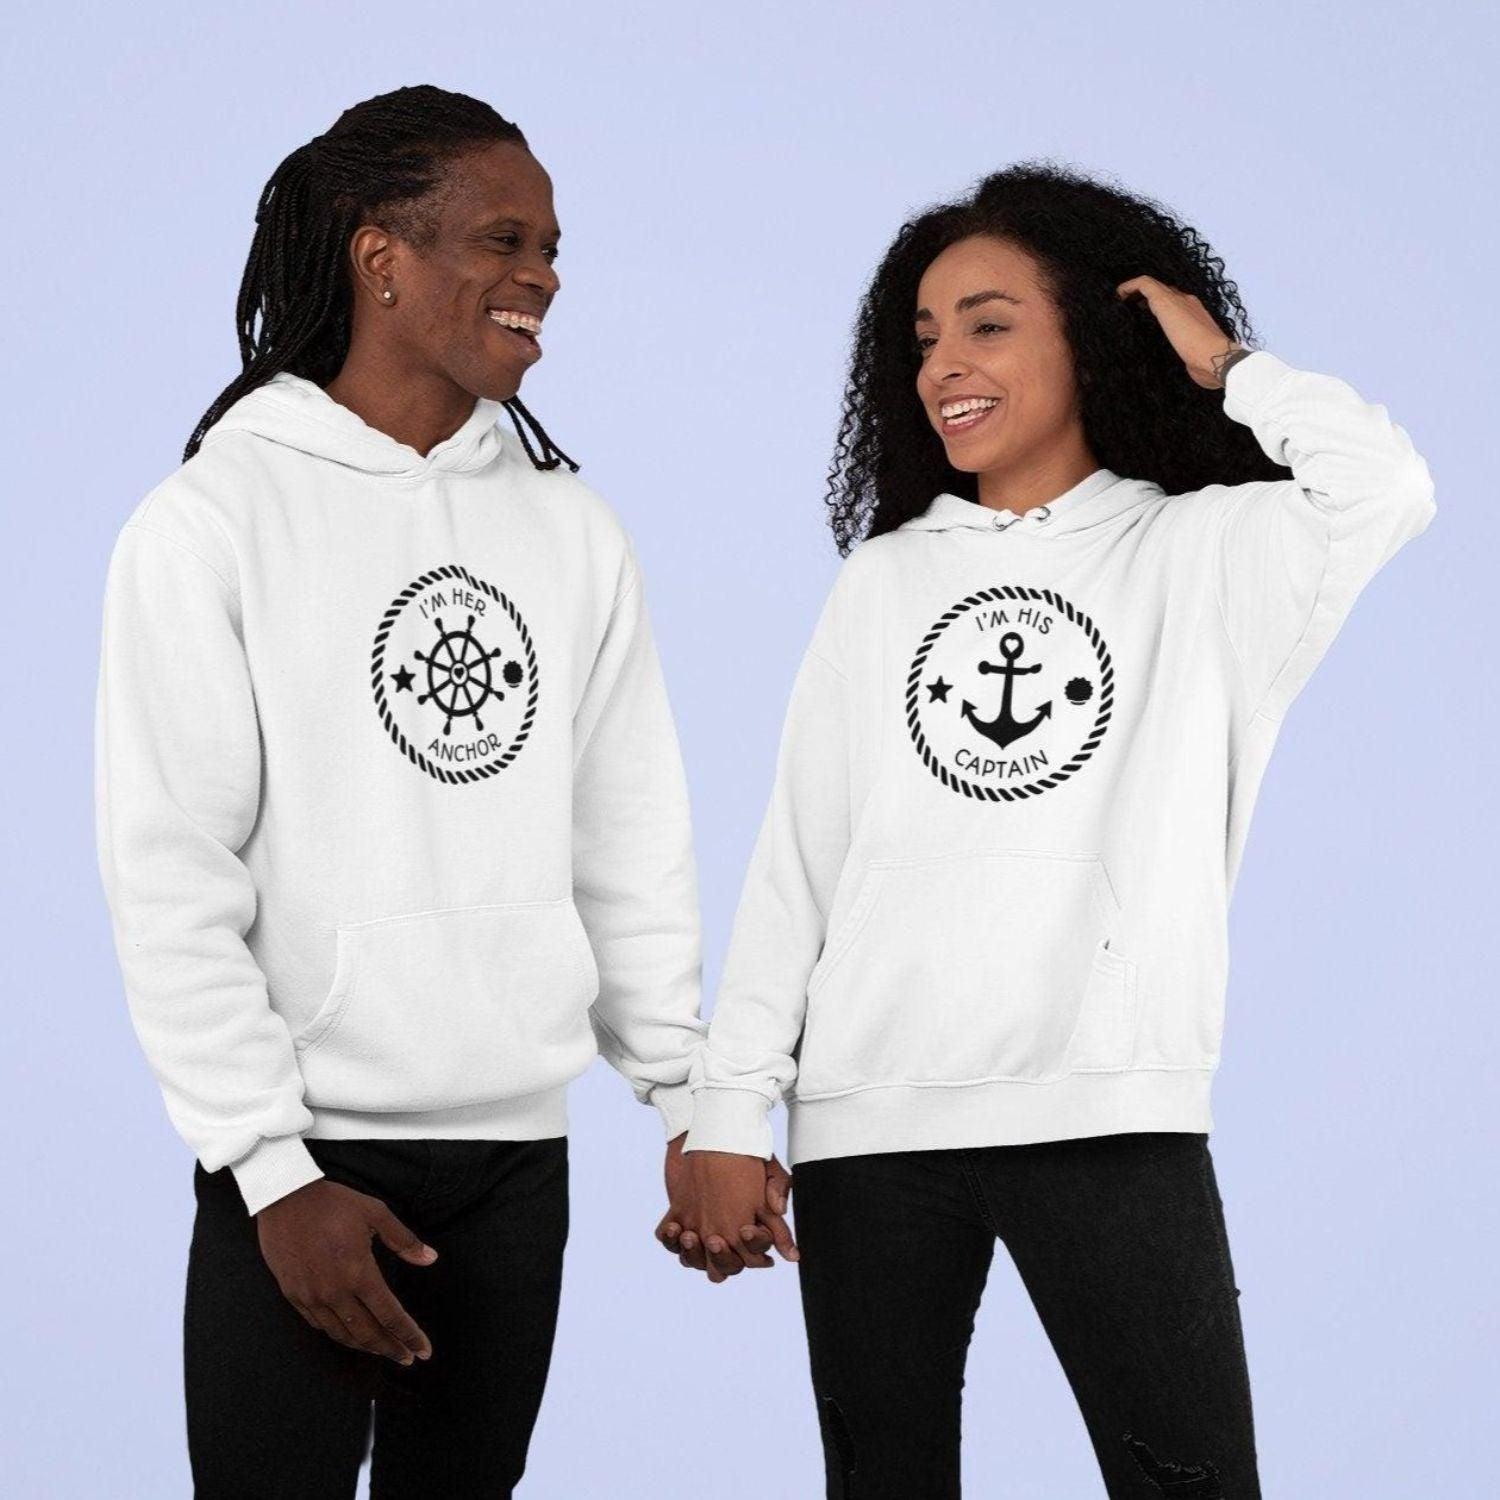 Matching Set: 'I'm Her Anchor, I'm His Captain' Gift for Couples, Navy Boat Fanatic Apparel - 4Lovebirds